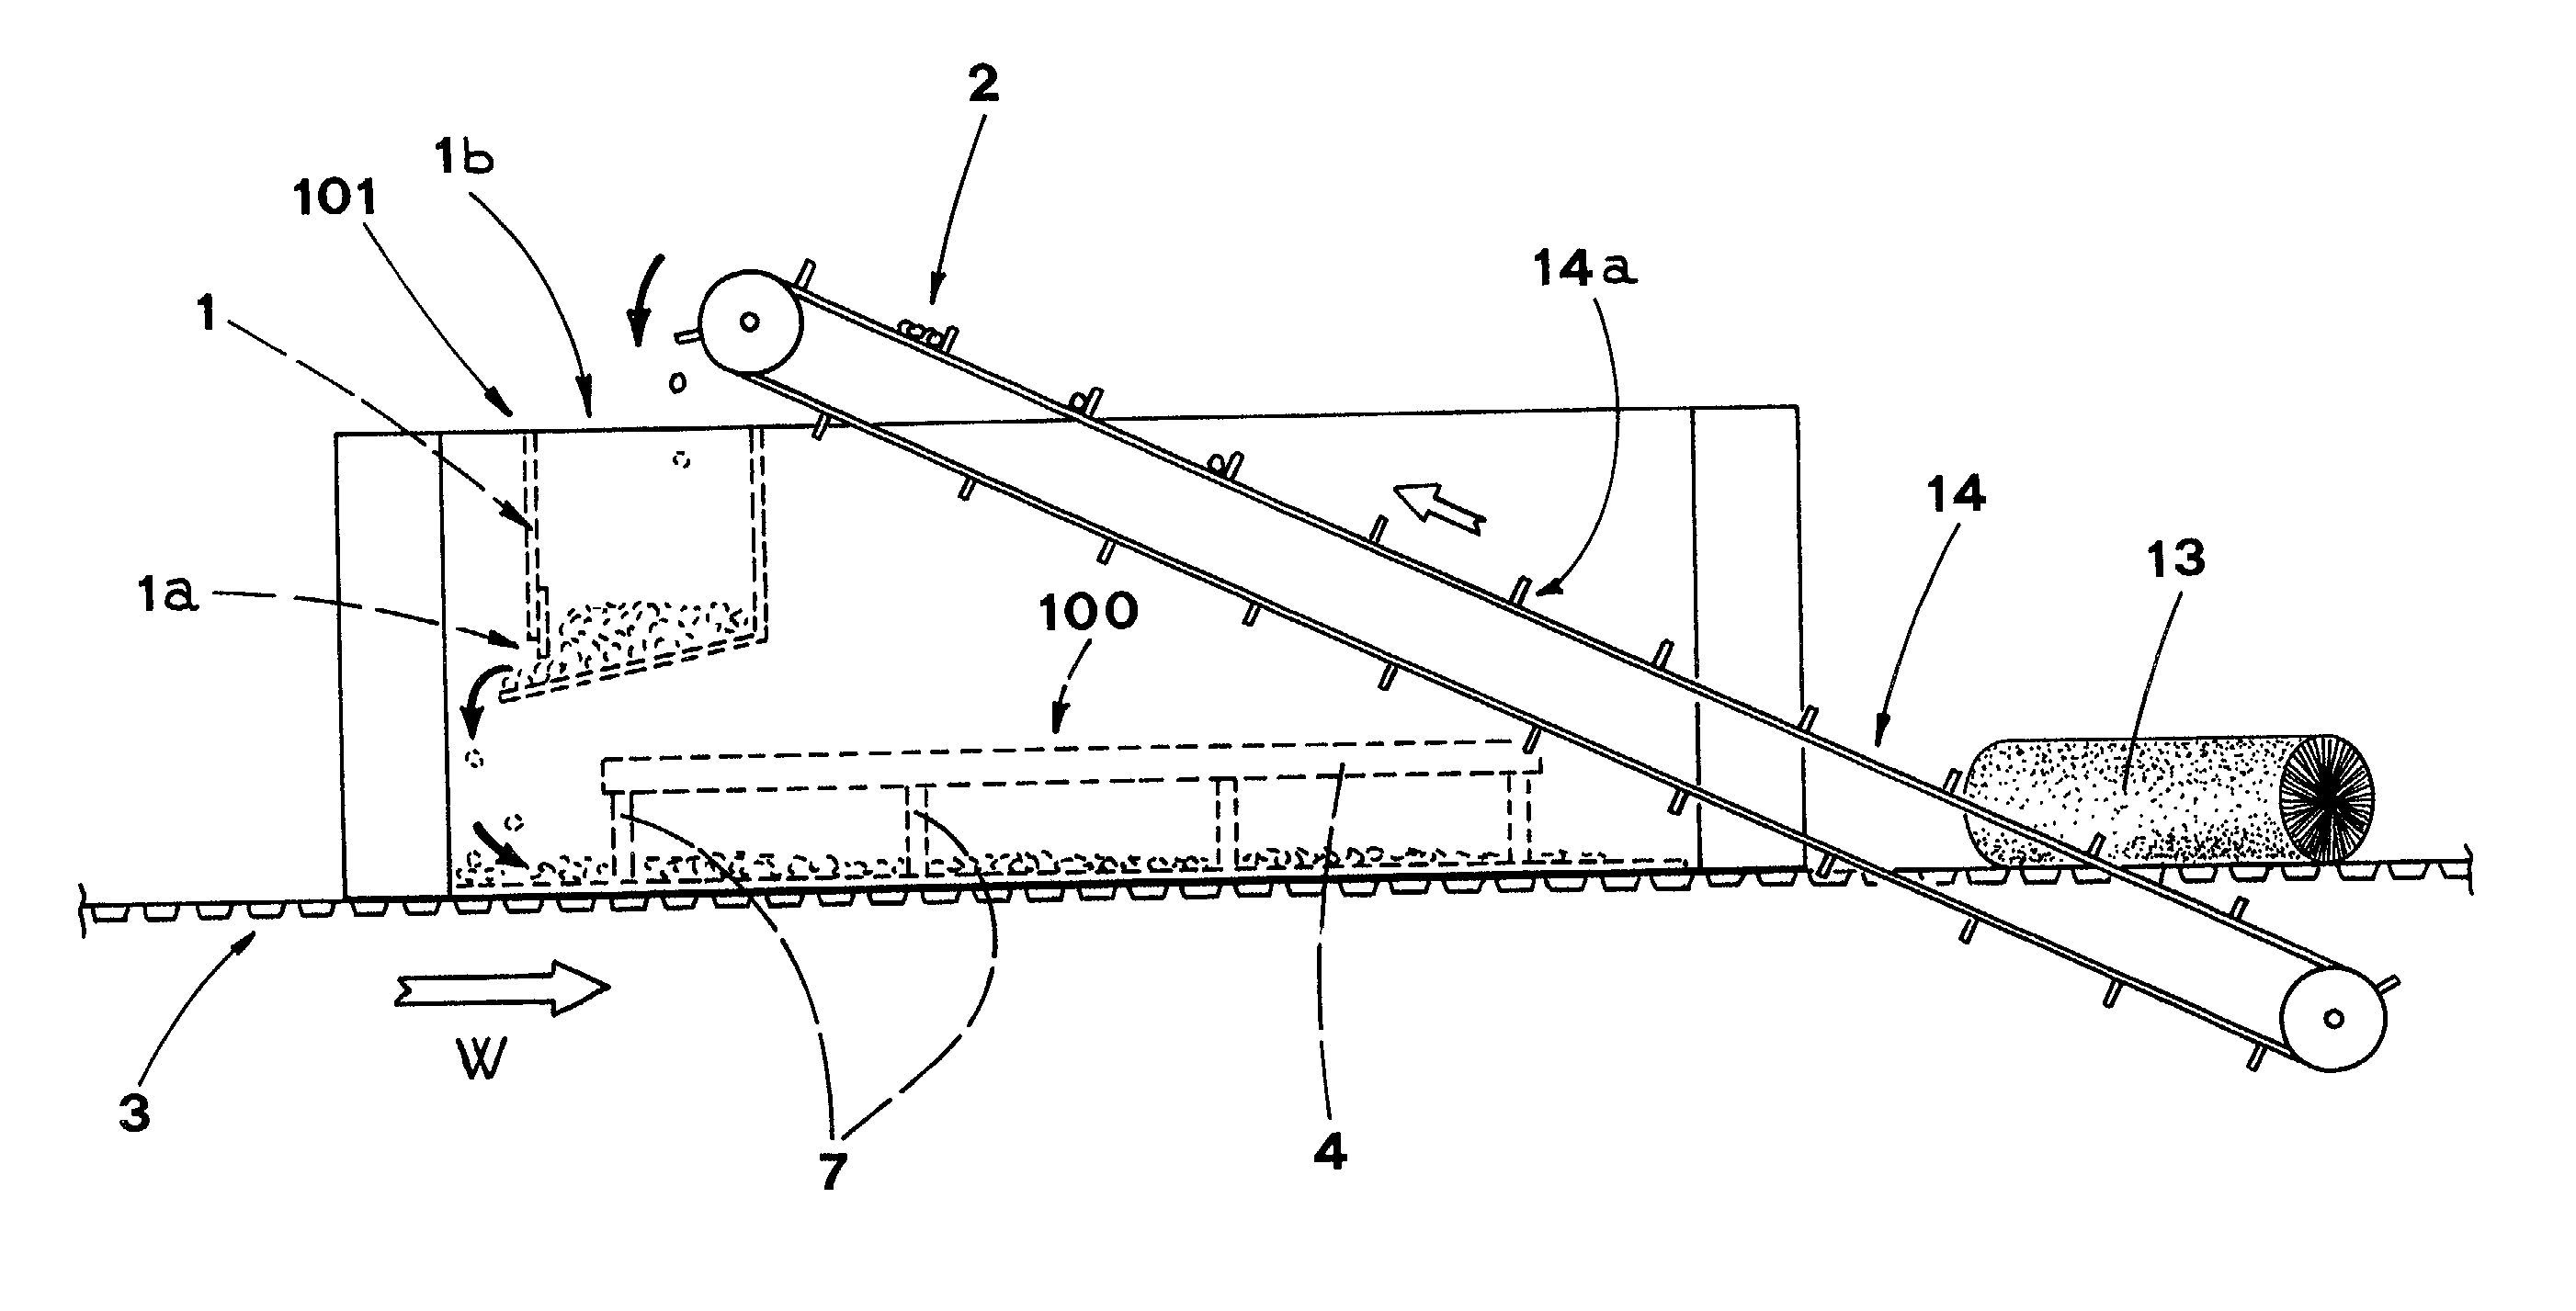 Device for feeding article to a blister band